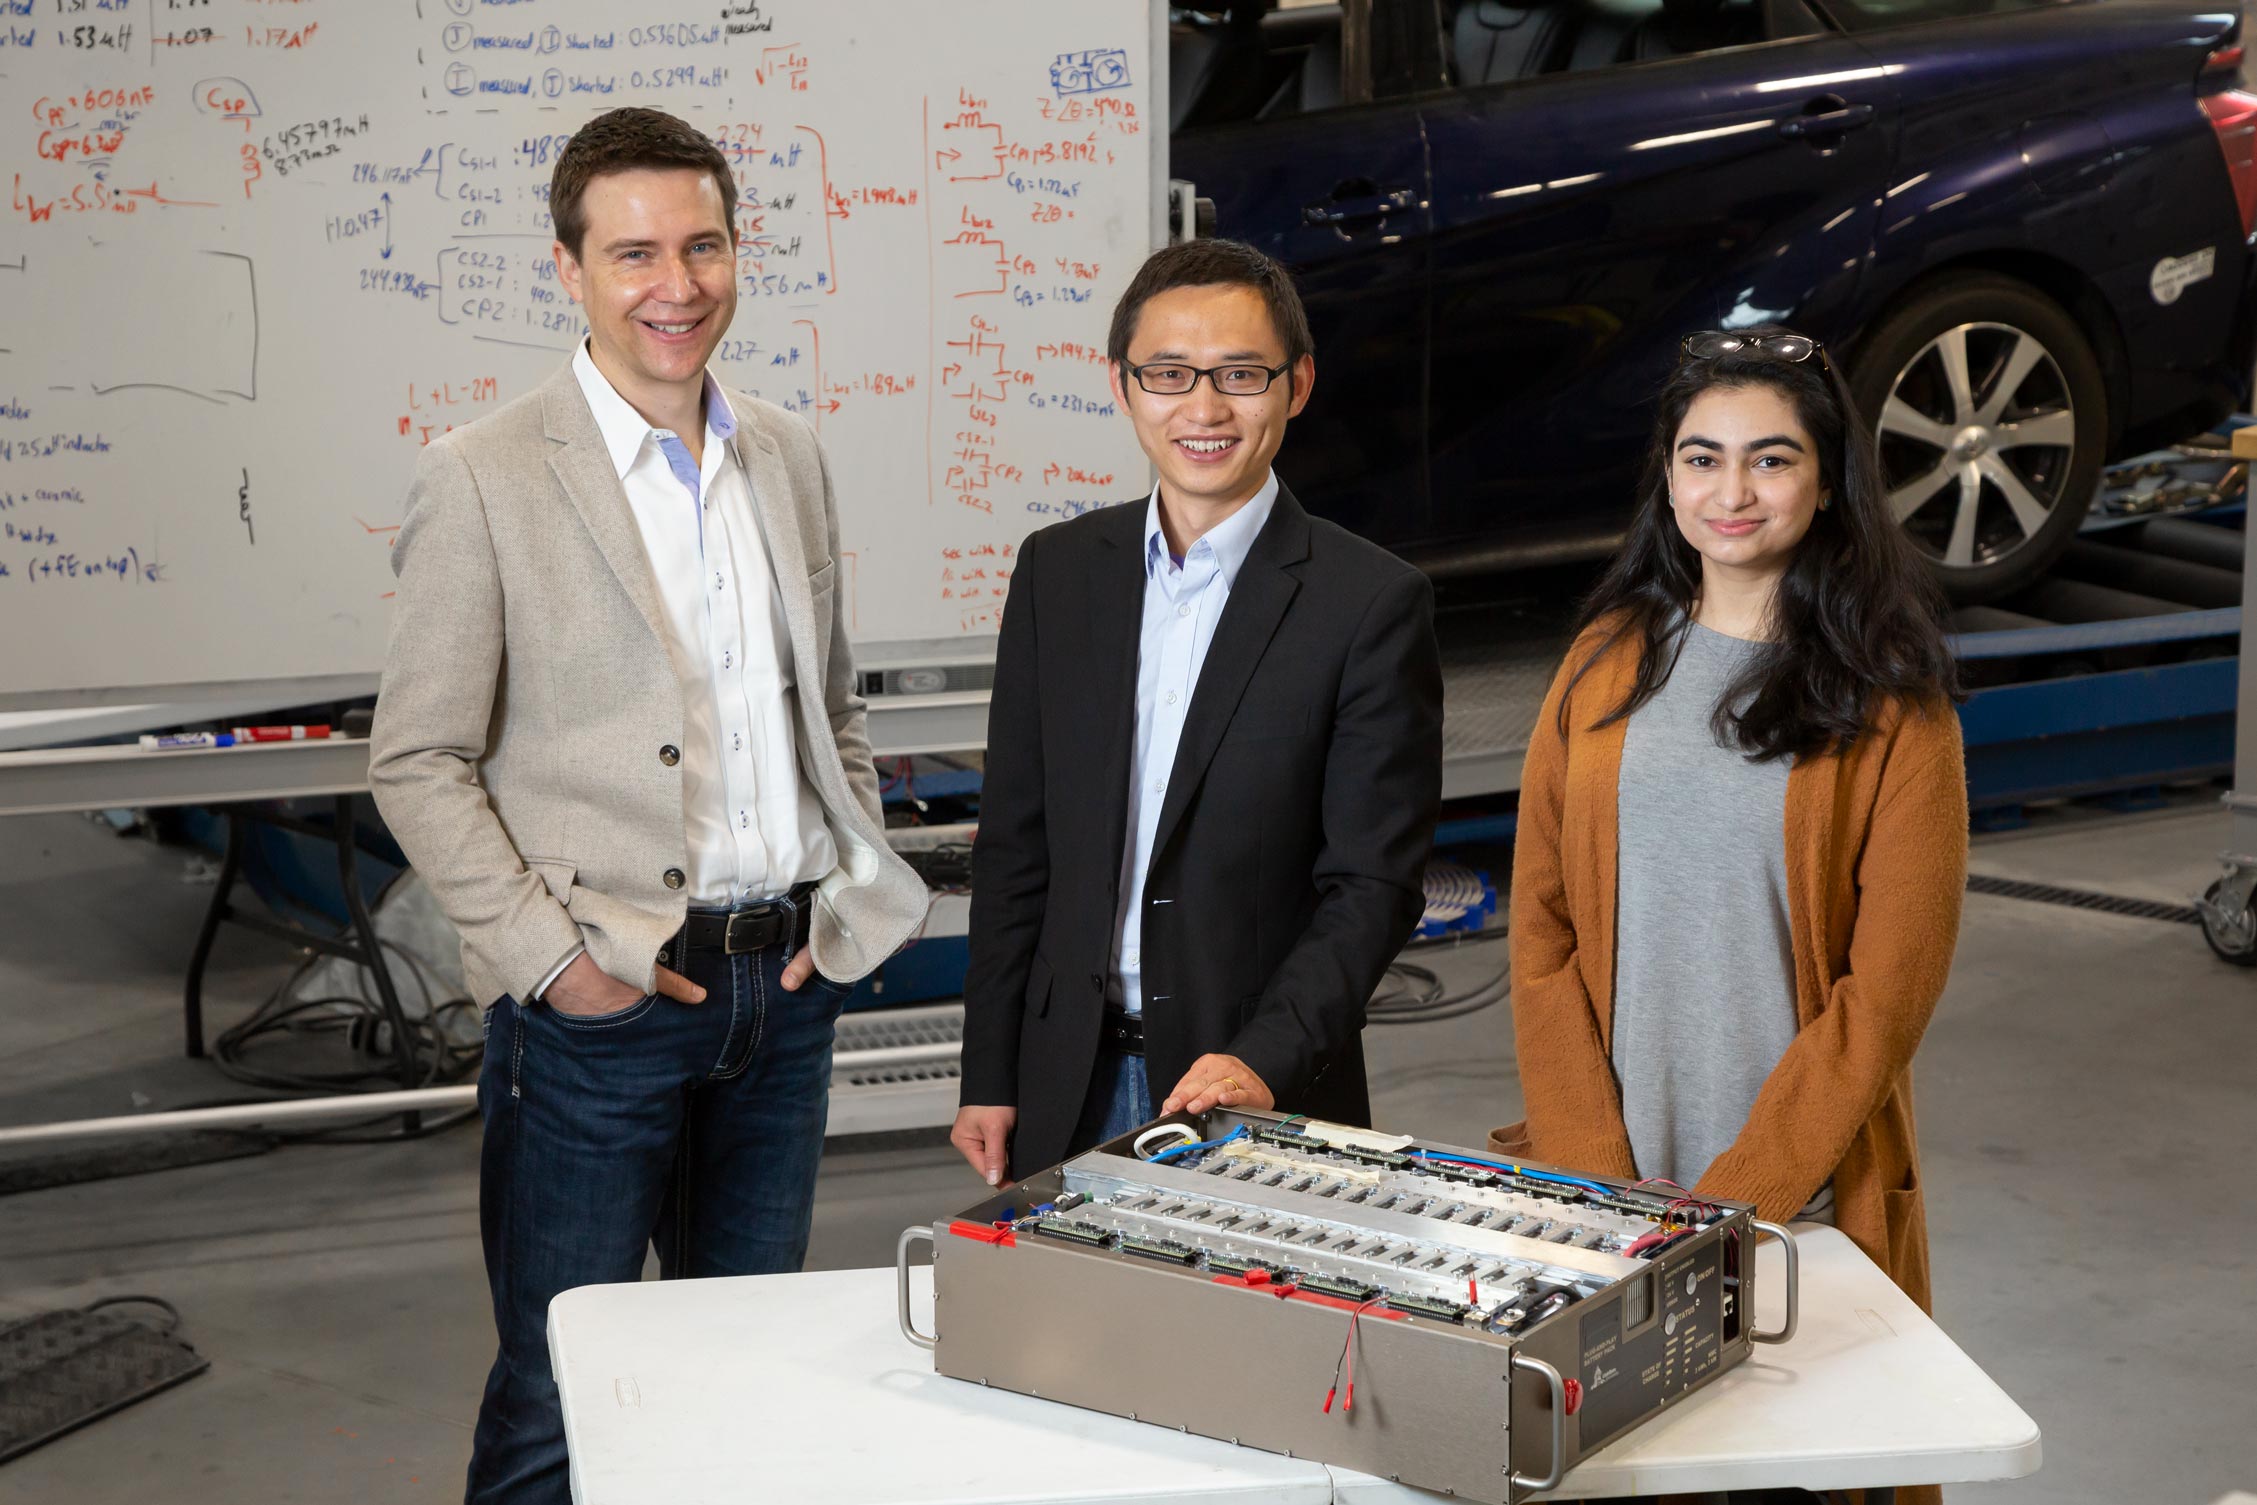 This technology is the result of work by USU researchers Dr. Hongjie Wang (center); Dr. Regan Zane; and electrical engineering doctoral students Marium Rasheed and Mohamed Kamel (not pictured).